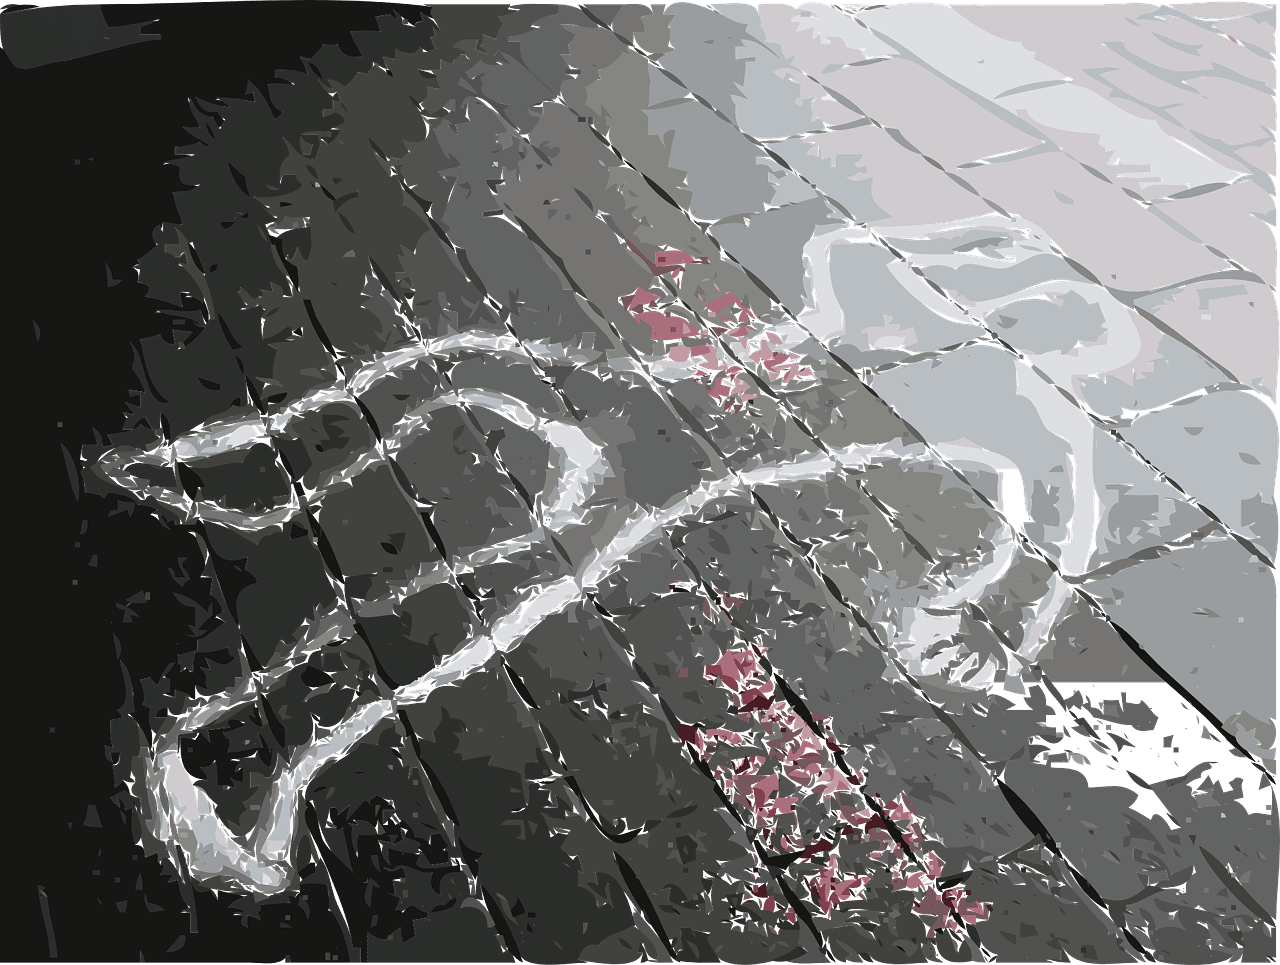 More murders occurred! | Photo: Pixabay/Clker-Free-Vector-Images